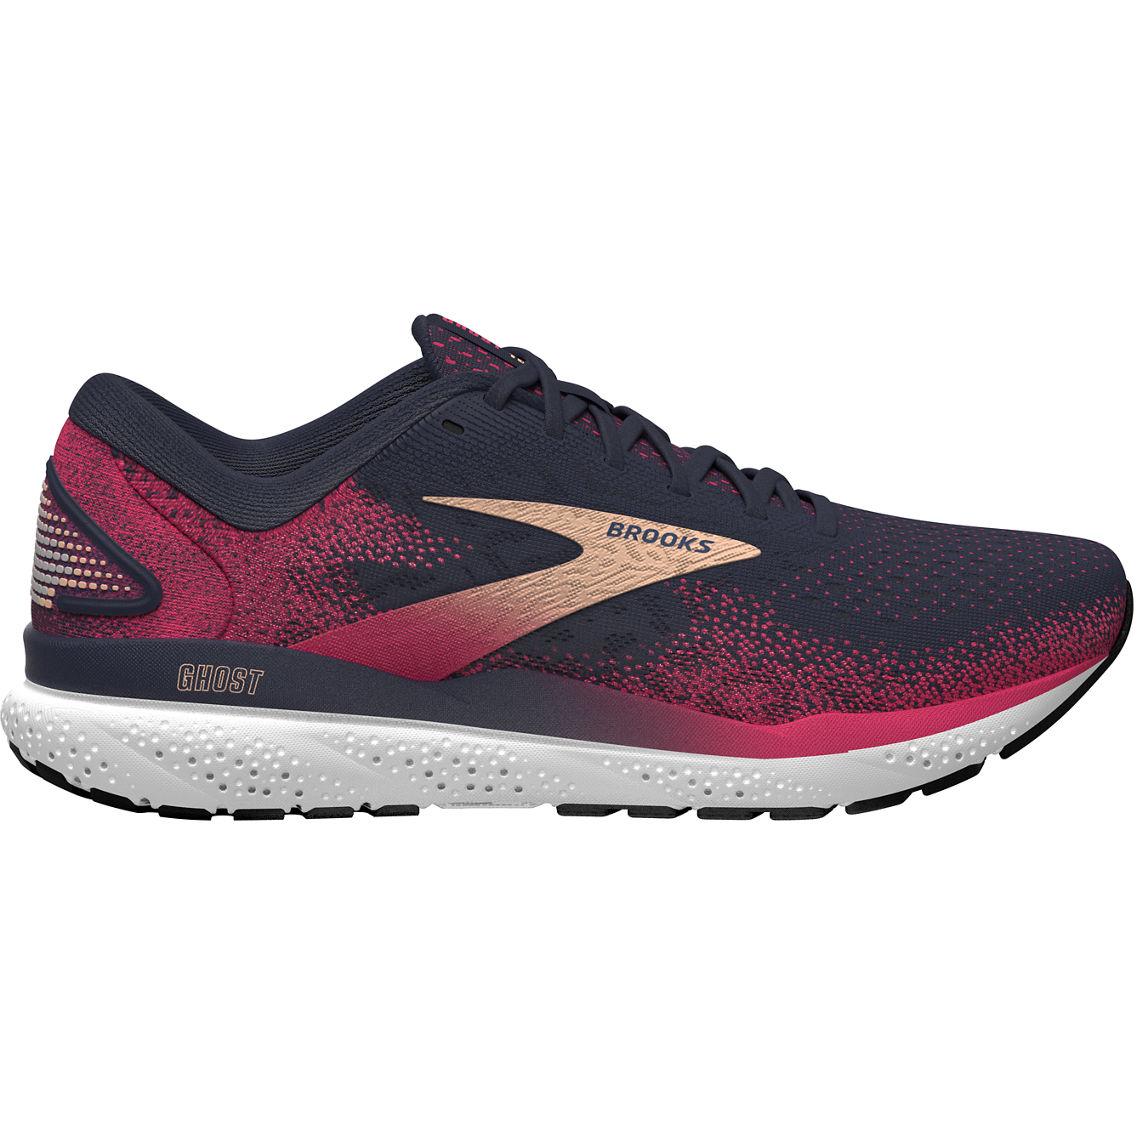 Brooks Women's Ghost 16 Running Shoes - Image 2 of 3